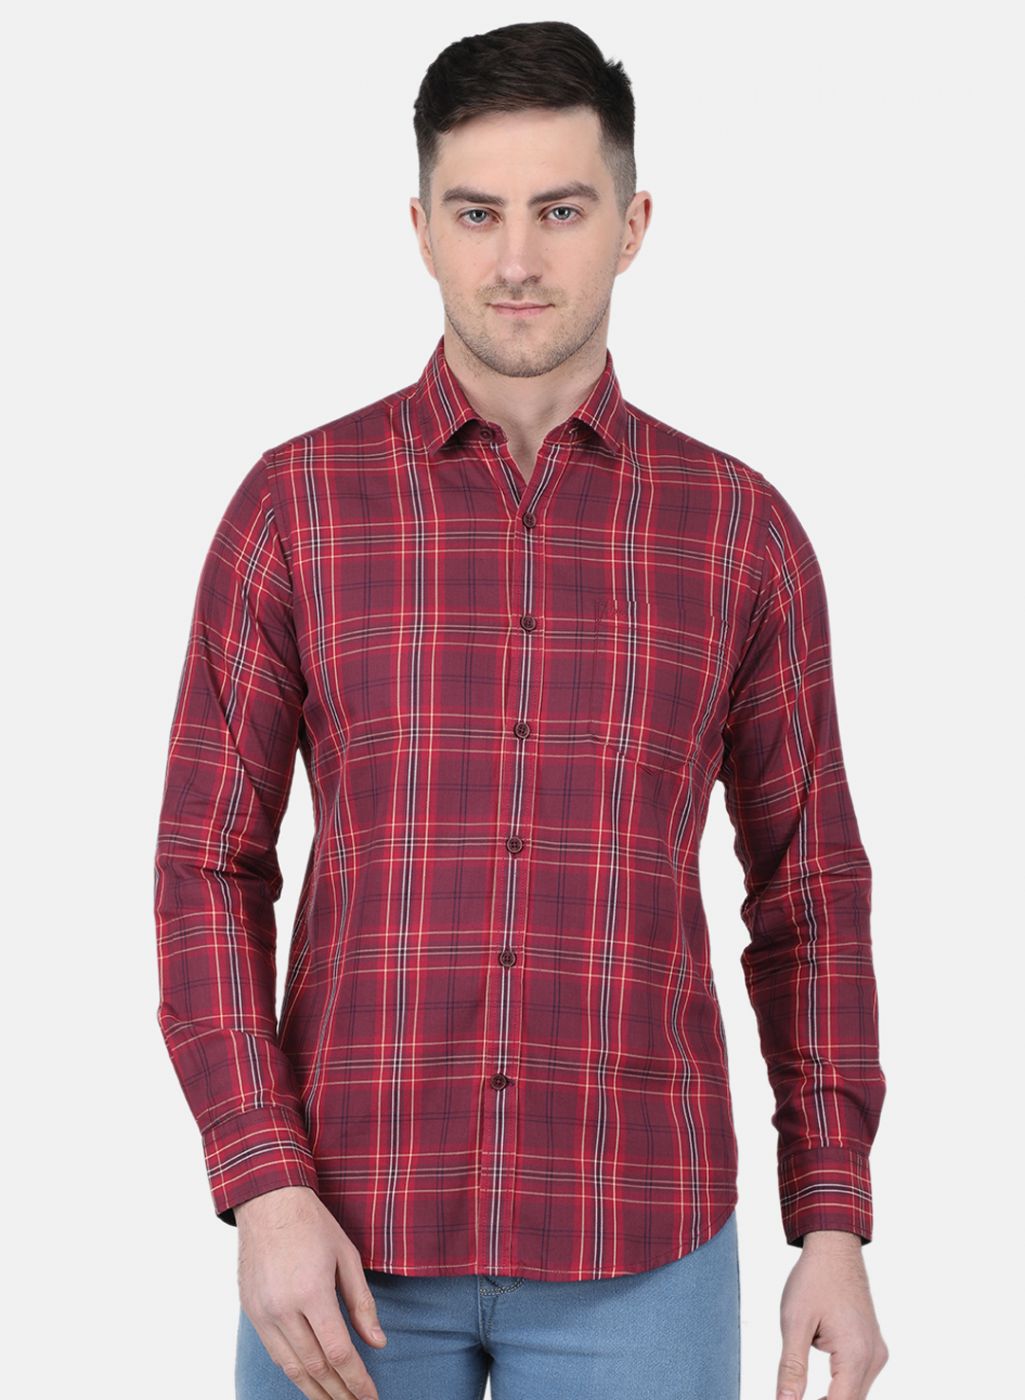 Buy Red Plaid Shirt Online In India -  India